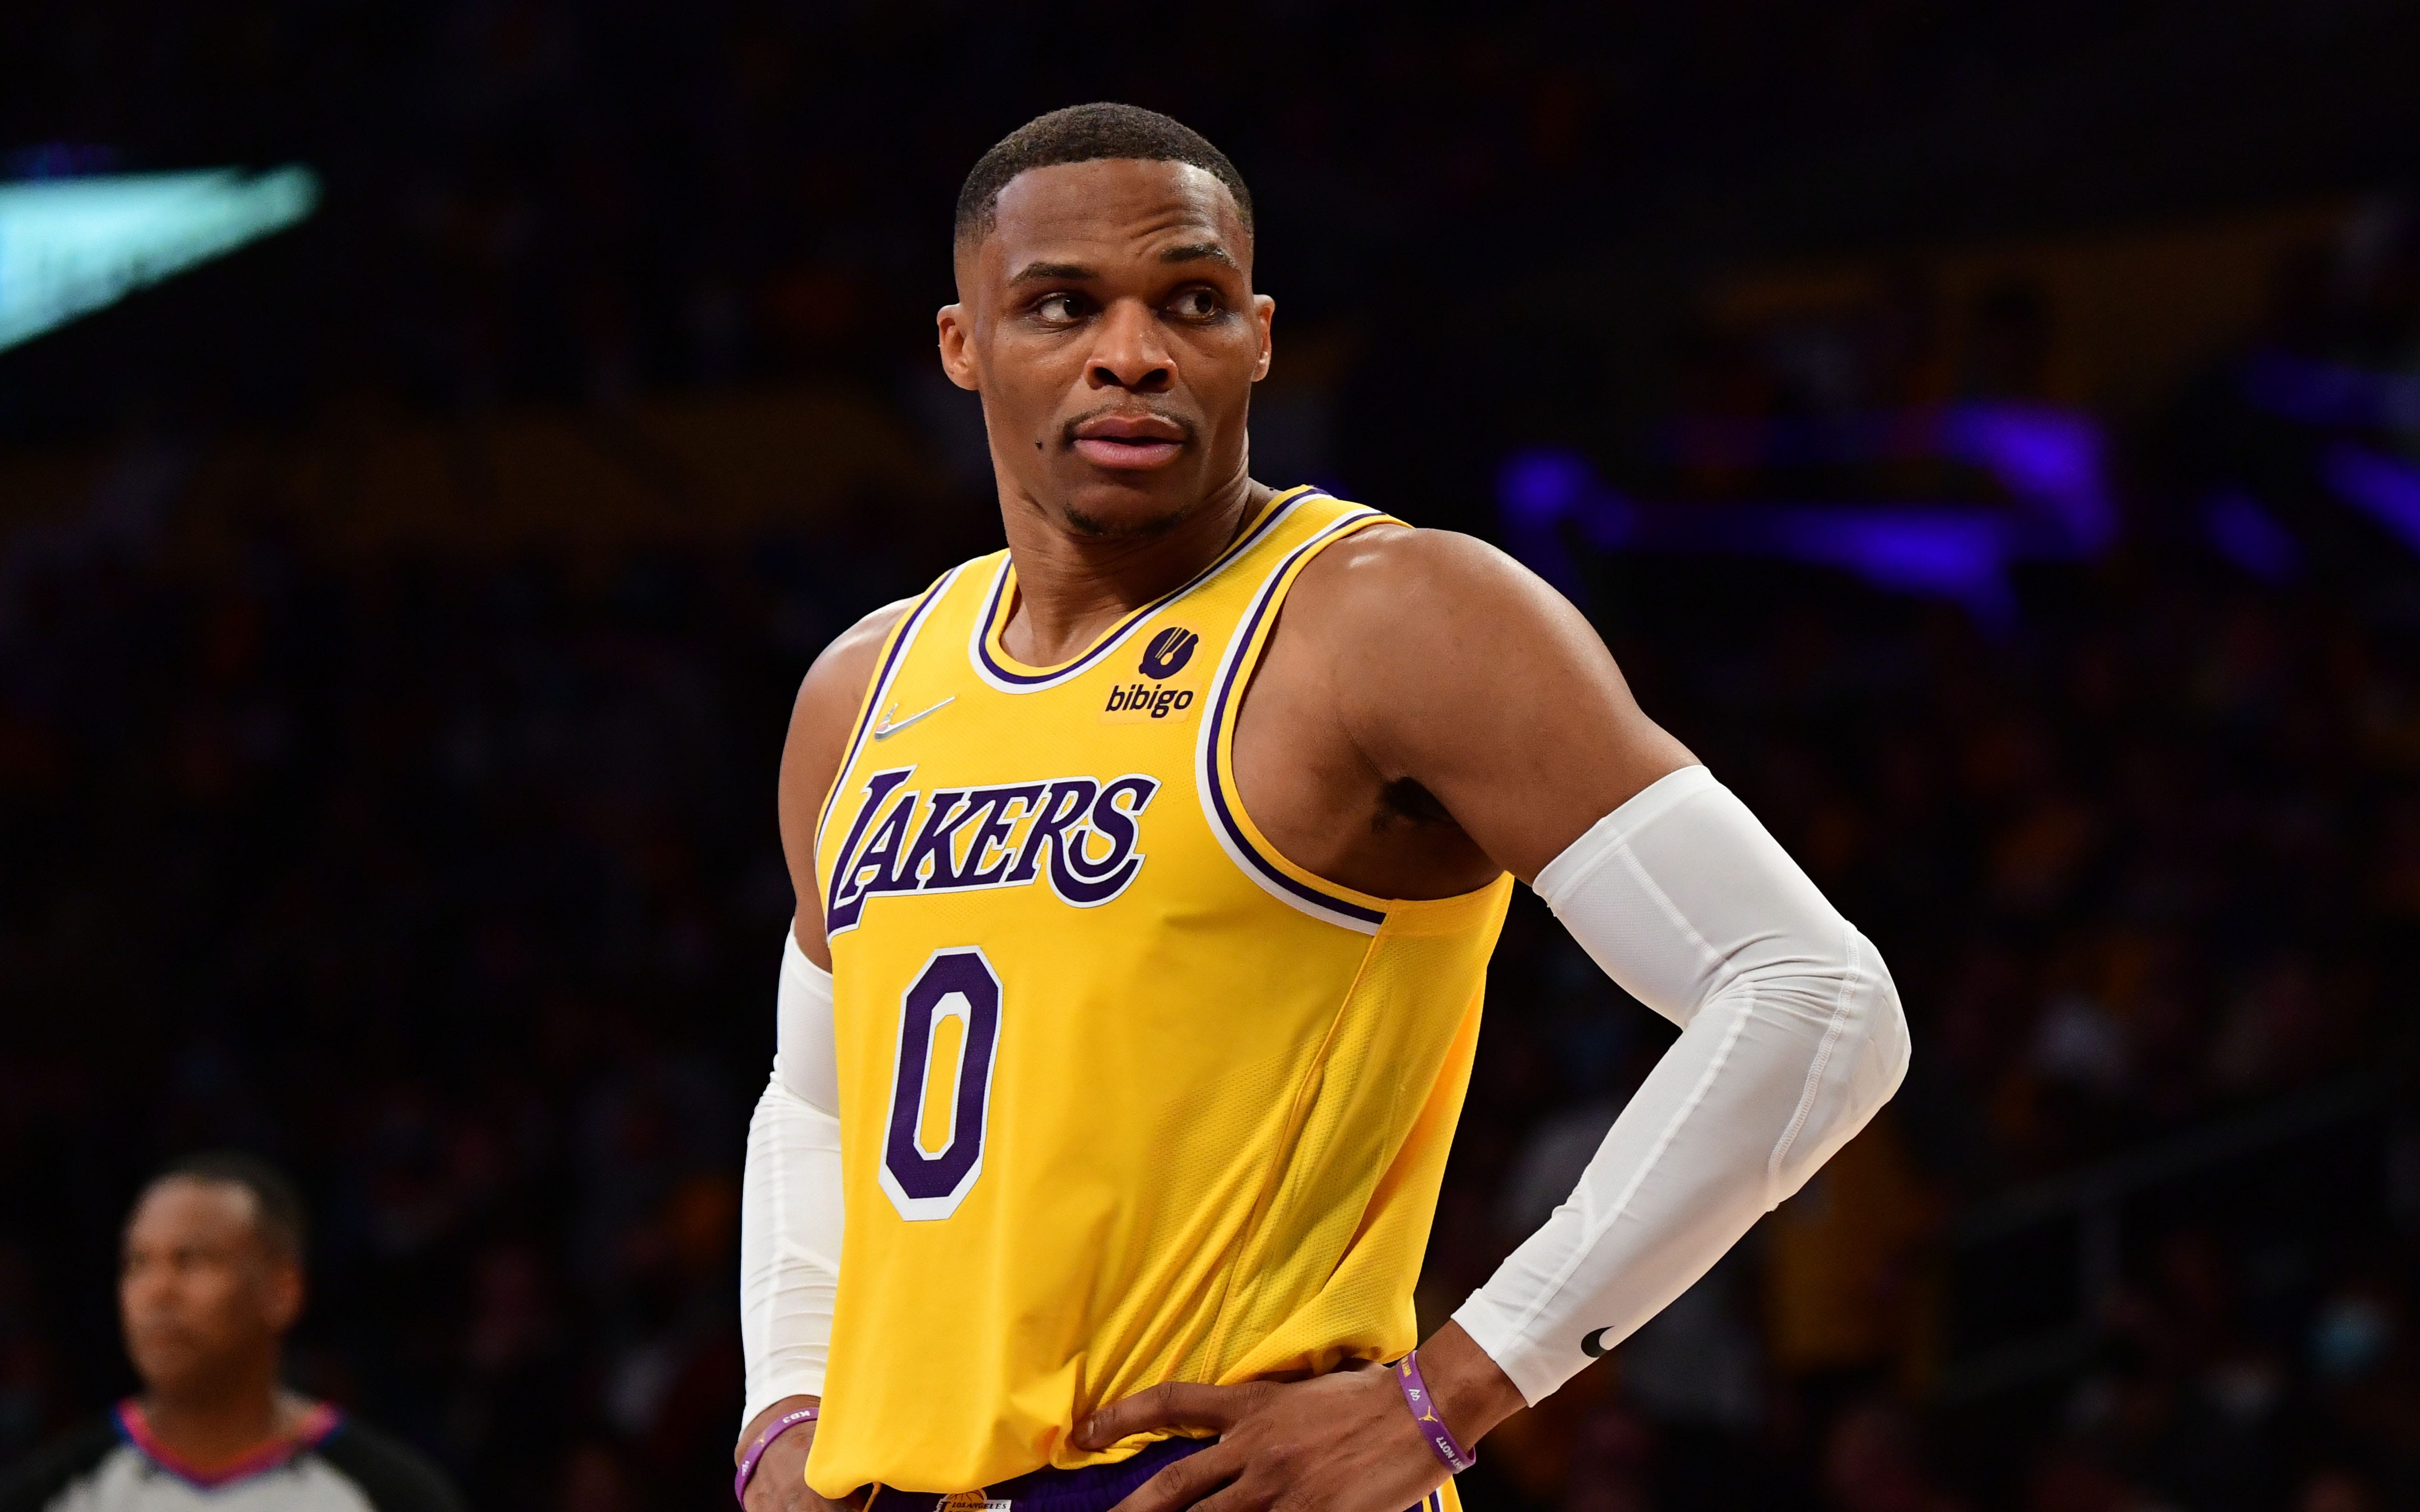 Lakers spurning Spurs' DeRozan for Westbrook was a big fail